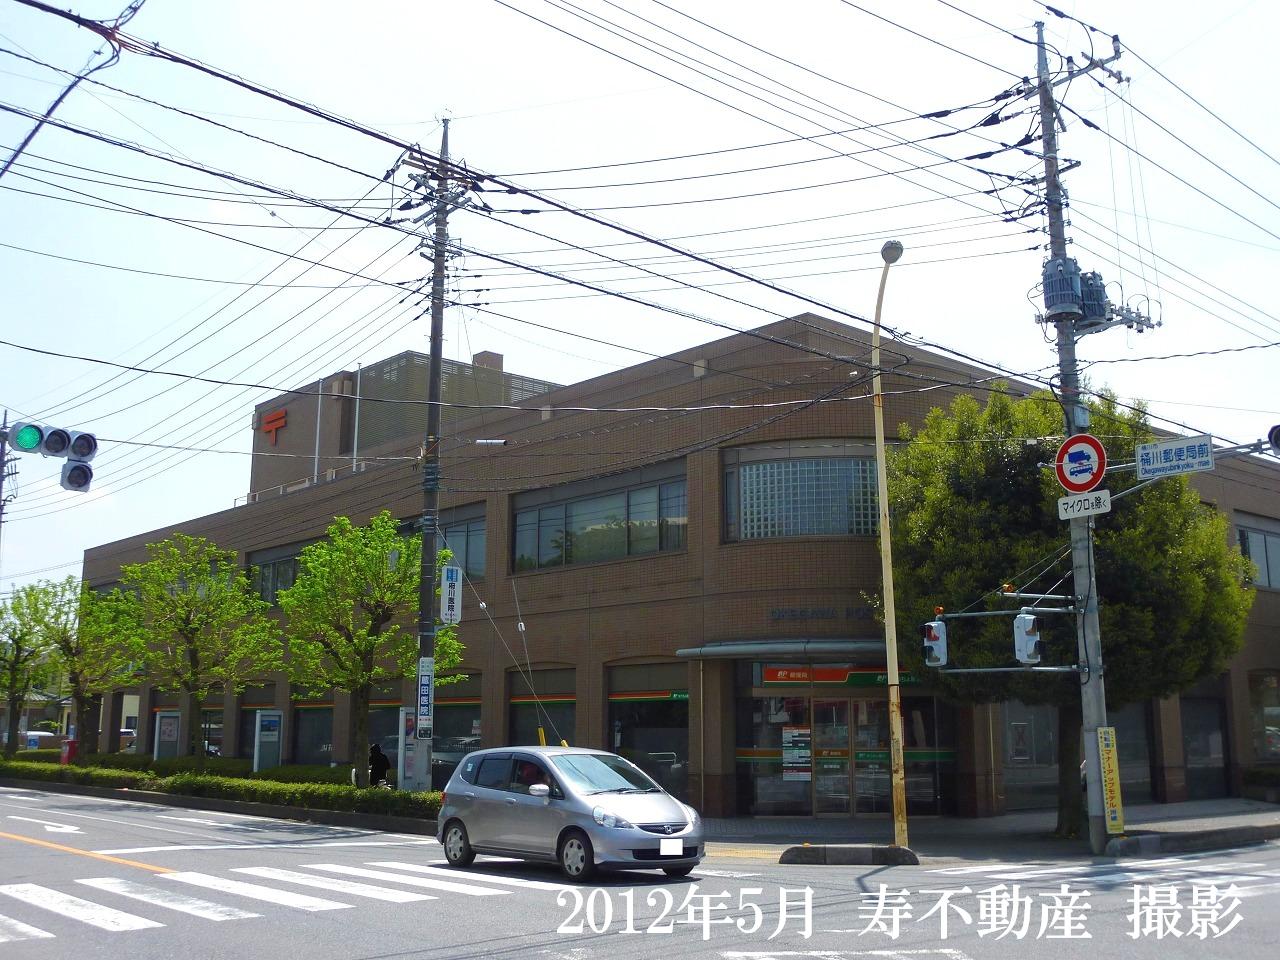 post office. Okegawa 400m until the post office (post office)